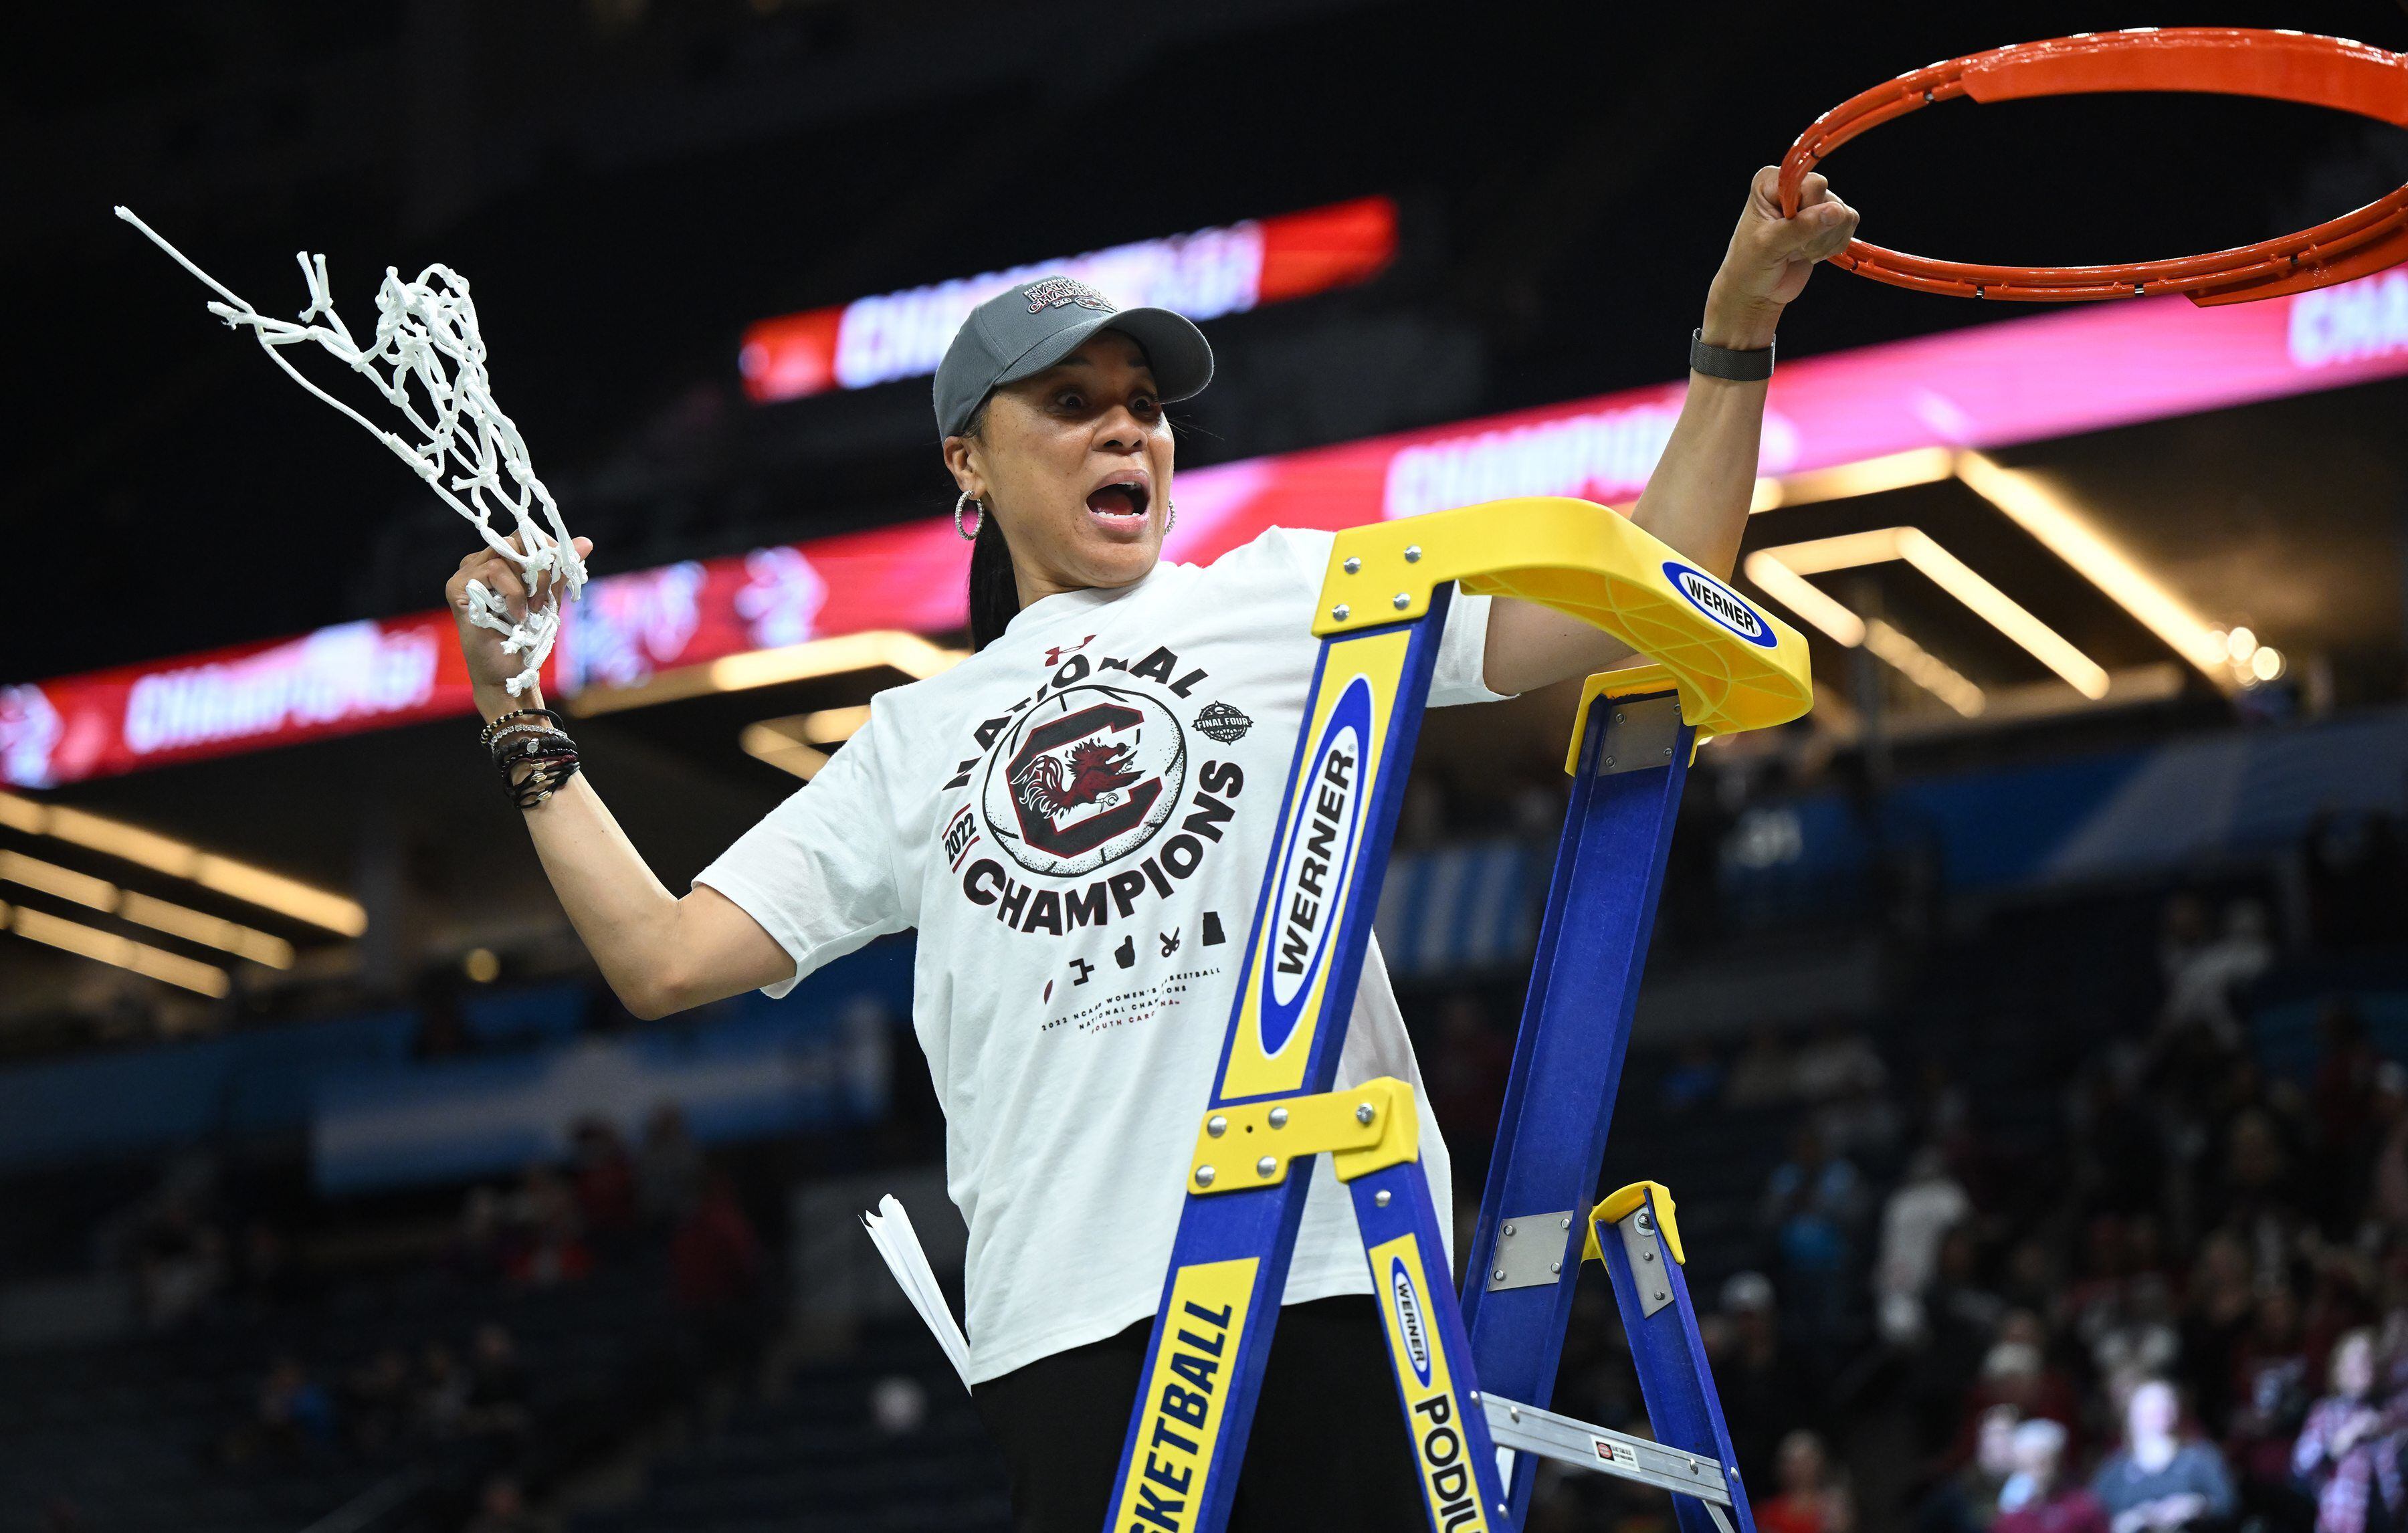 Dawn Staley wears vintage jersey, gives history lesson during NCAA tourney